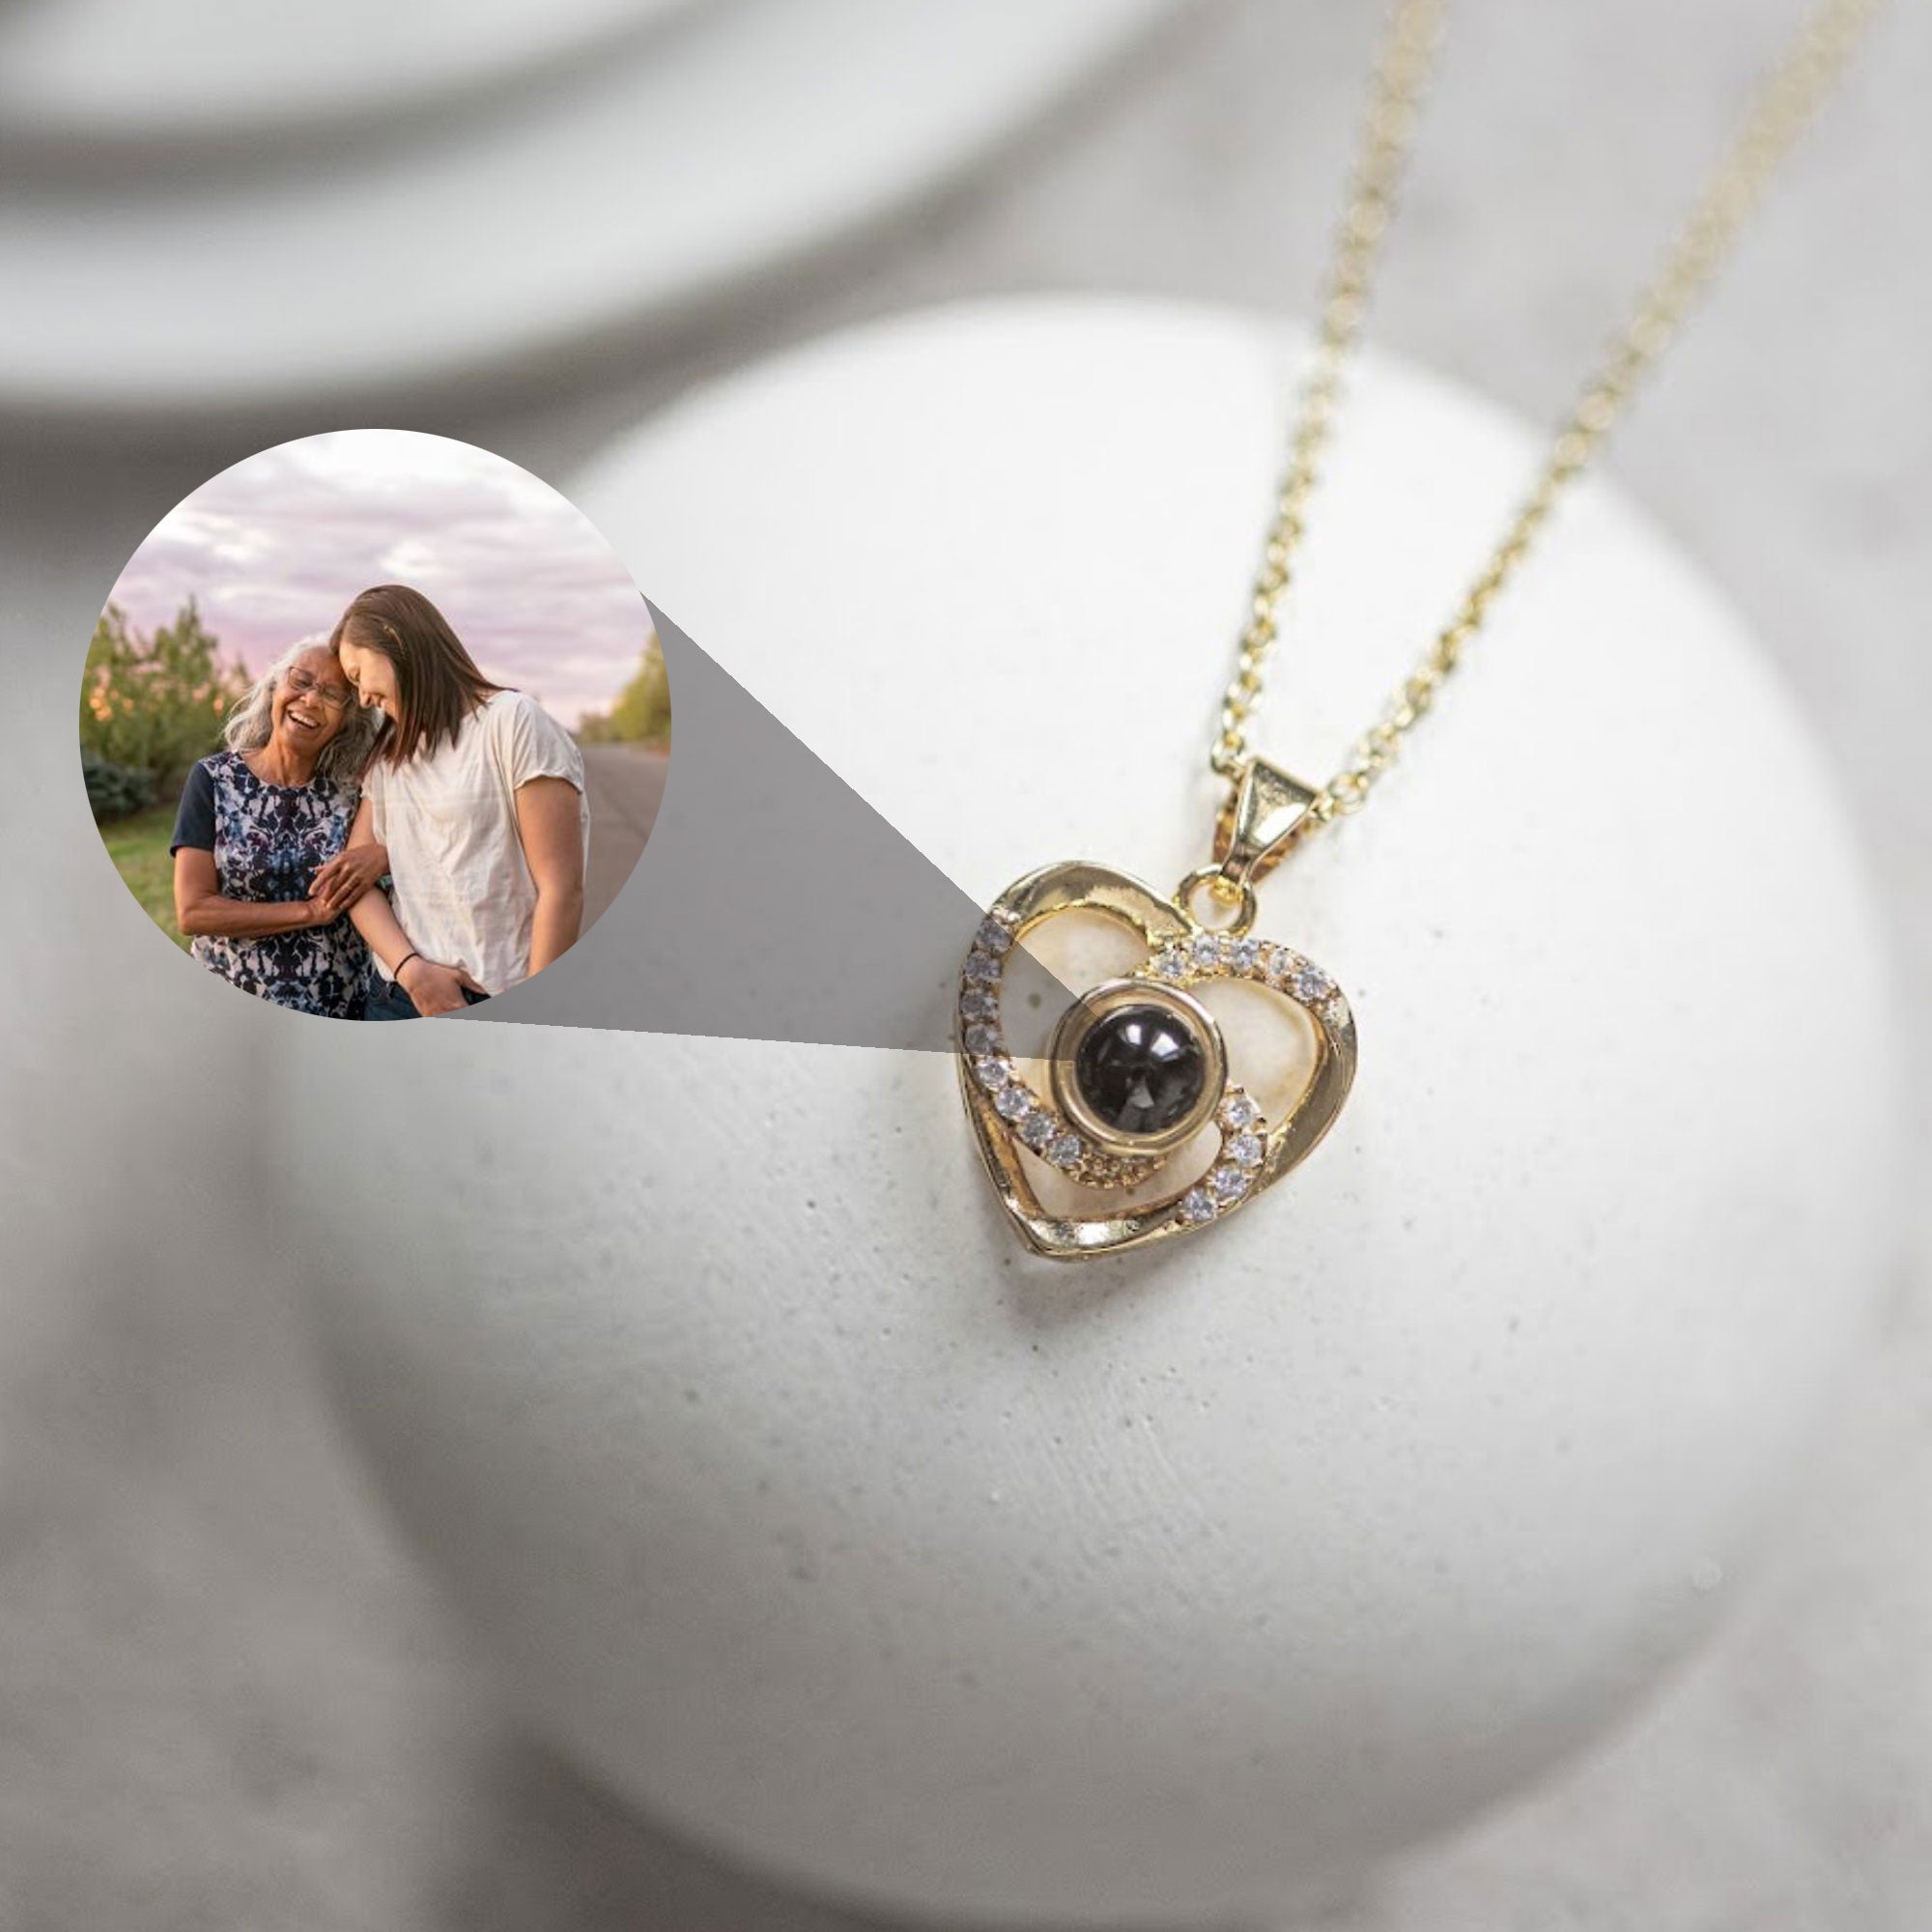 Custom Love Heart Photo Projection Necklace, Personalized Lovers Picture Necklace